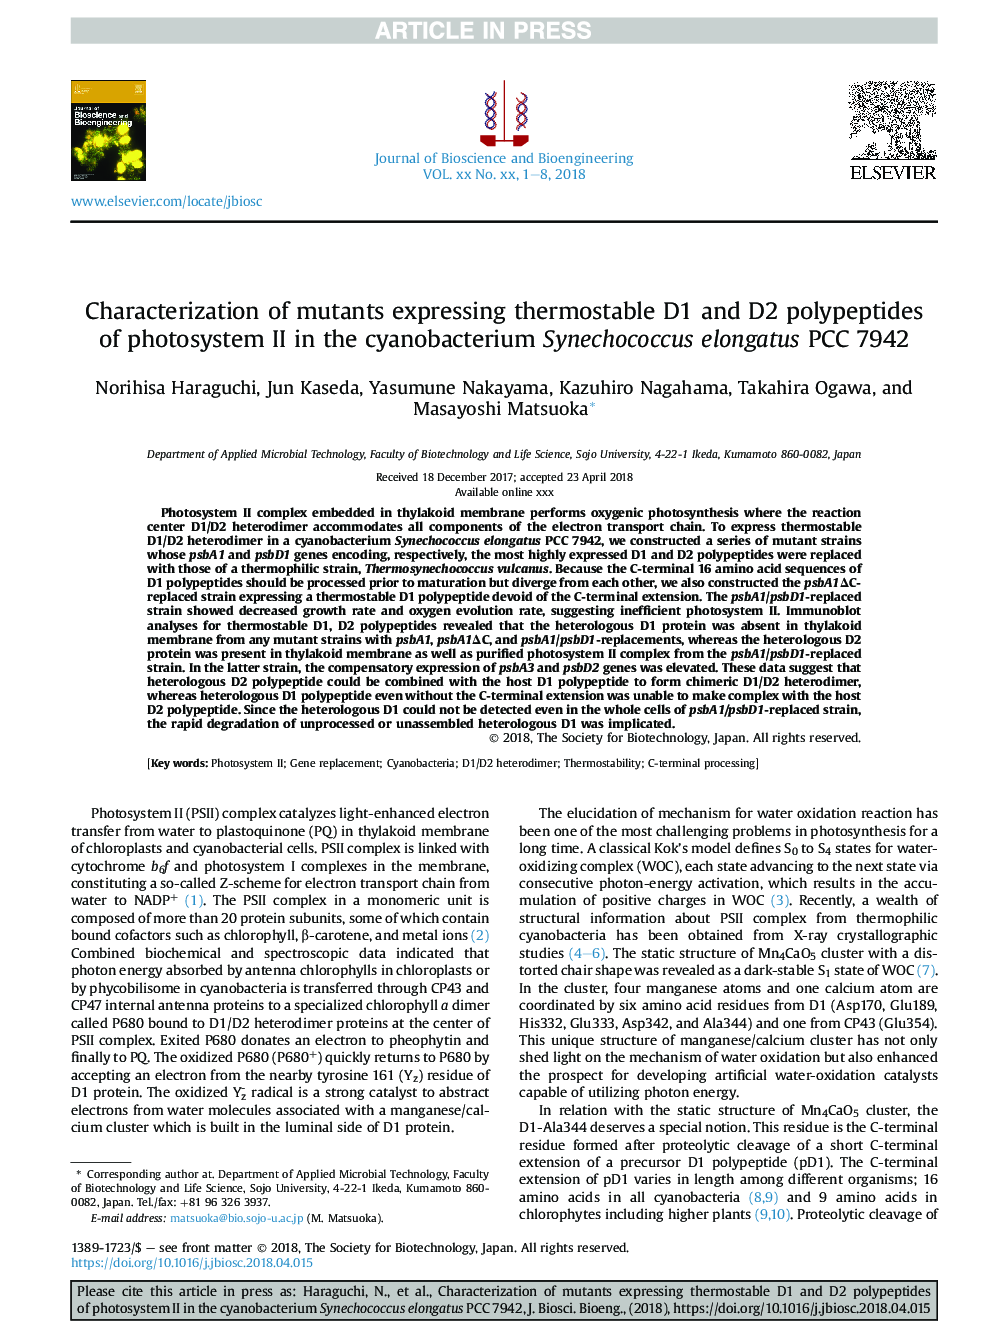 Characterization of mutants expressing thermostable D1 and D2 polypeptides ofÂ photosystem II in the cyanobacterium Synechococcus elongatus PCC 7942